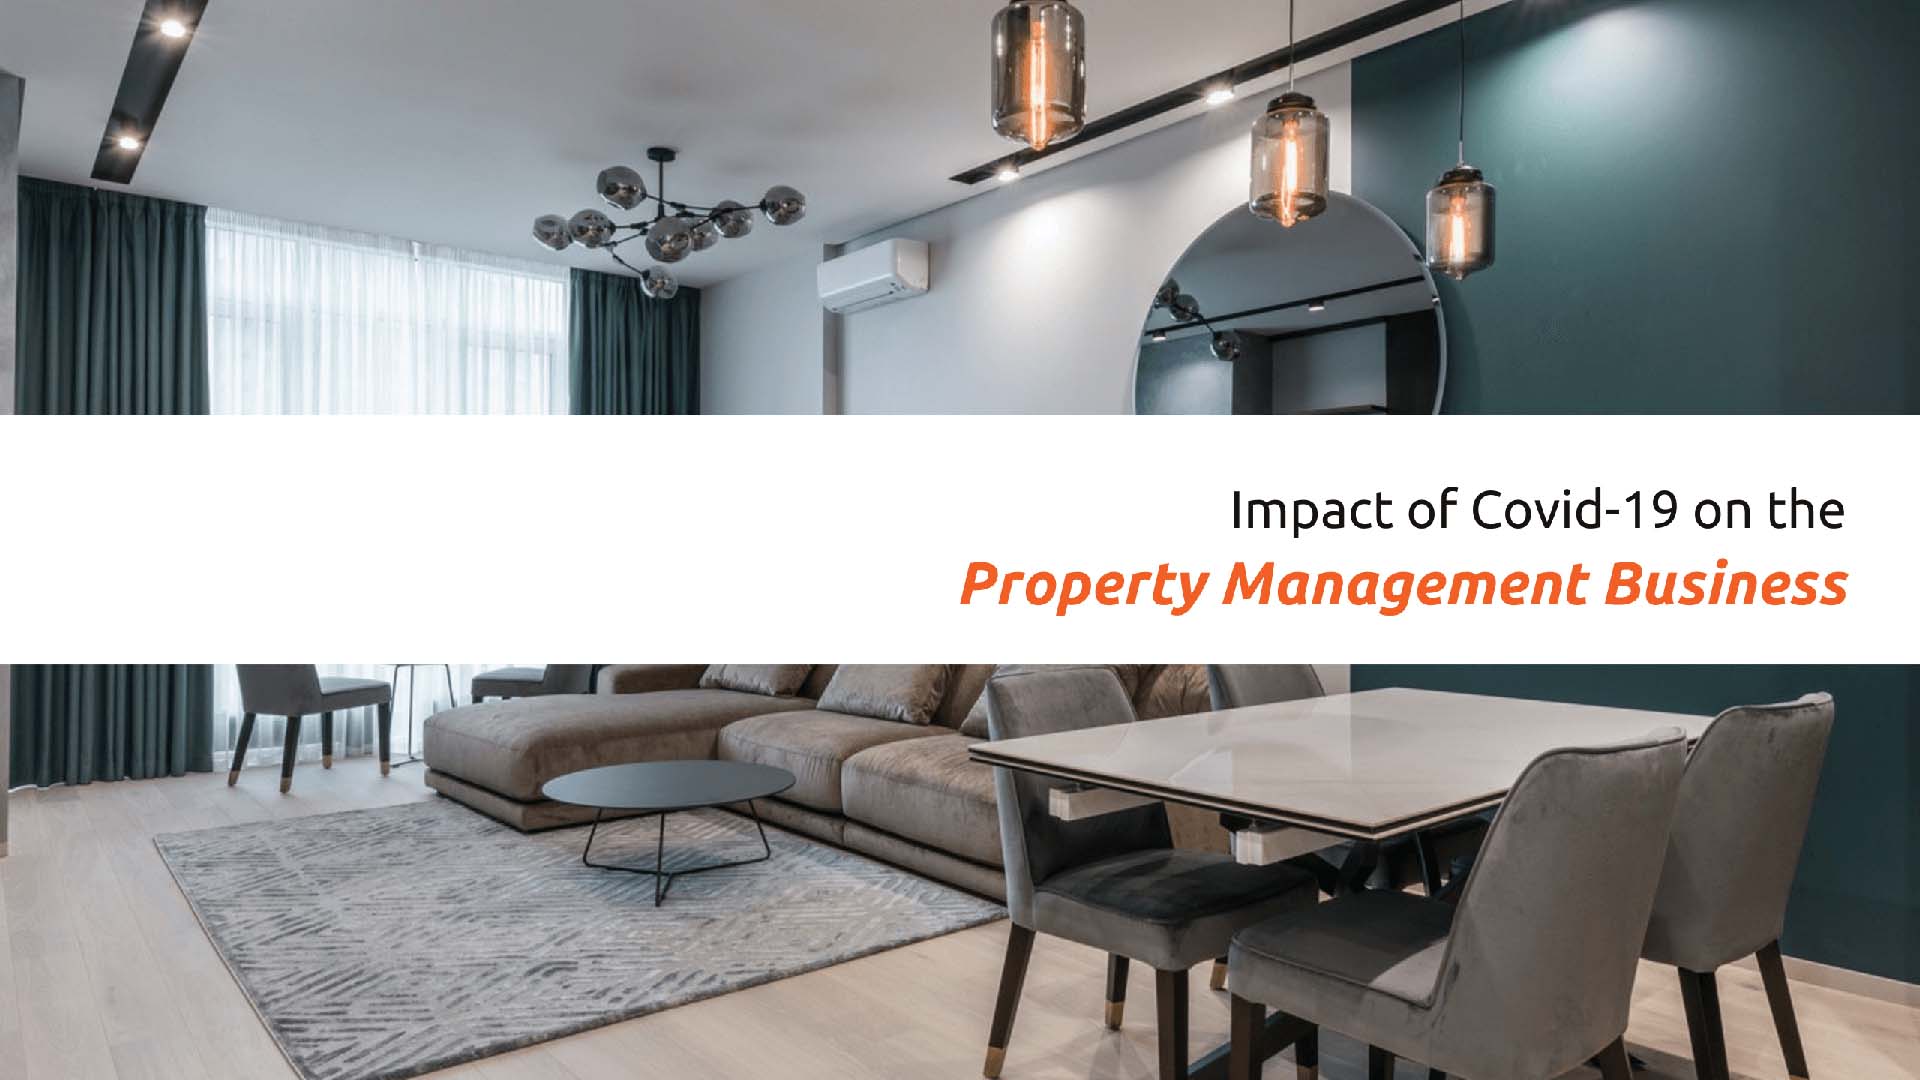 What is The Biggest Impact of Covid-19 on the Property Management Business in St. Louis?